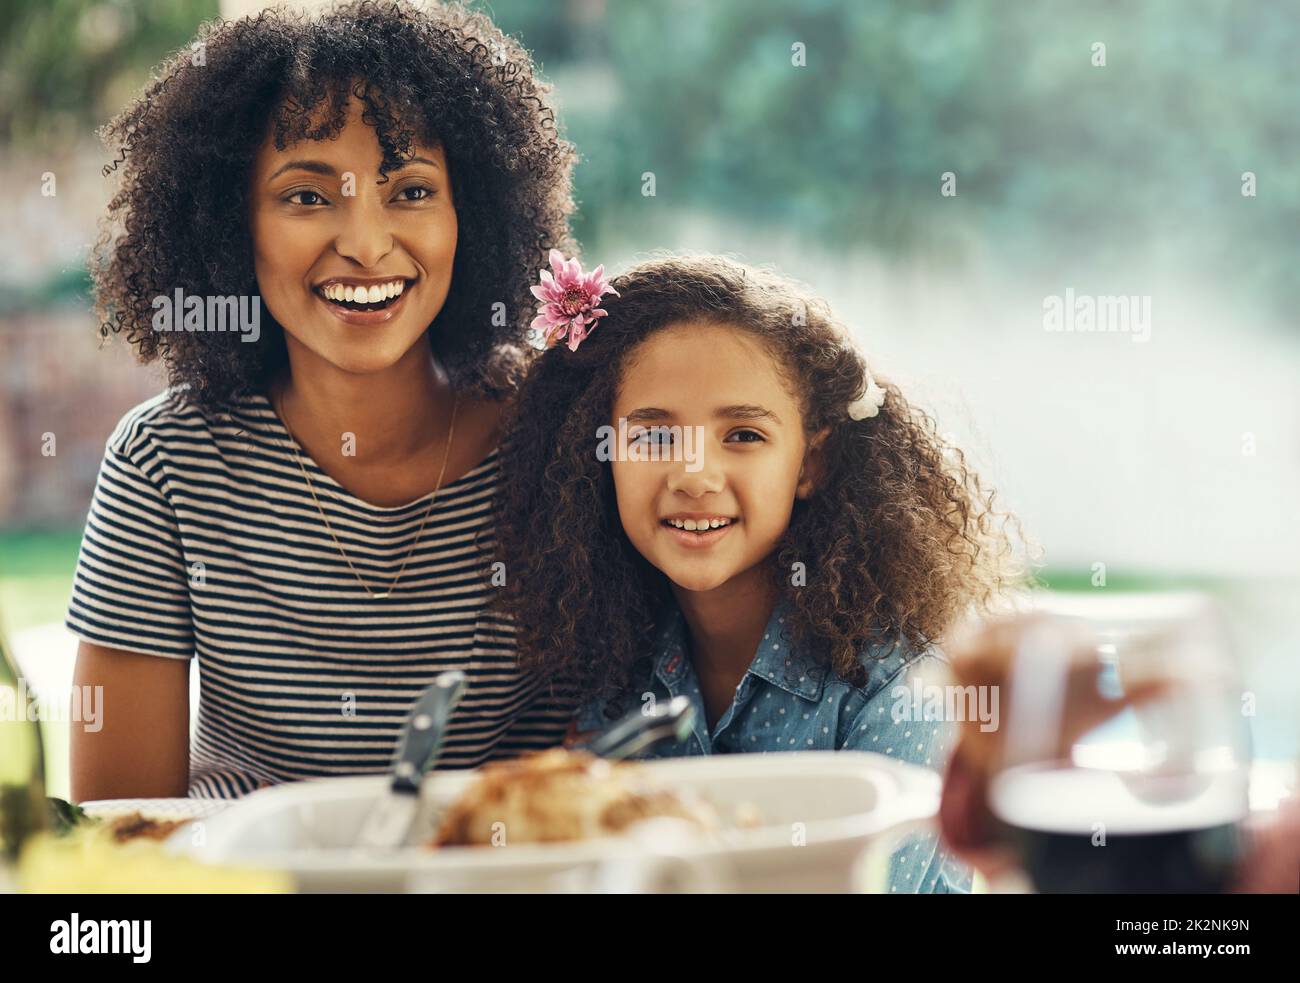 Like mother like daughter. Portrait of a beautiful mother and daughter posing together during a family gathering at home. Stock Photo